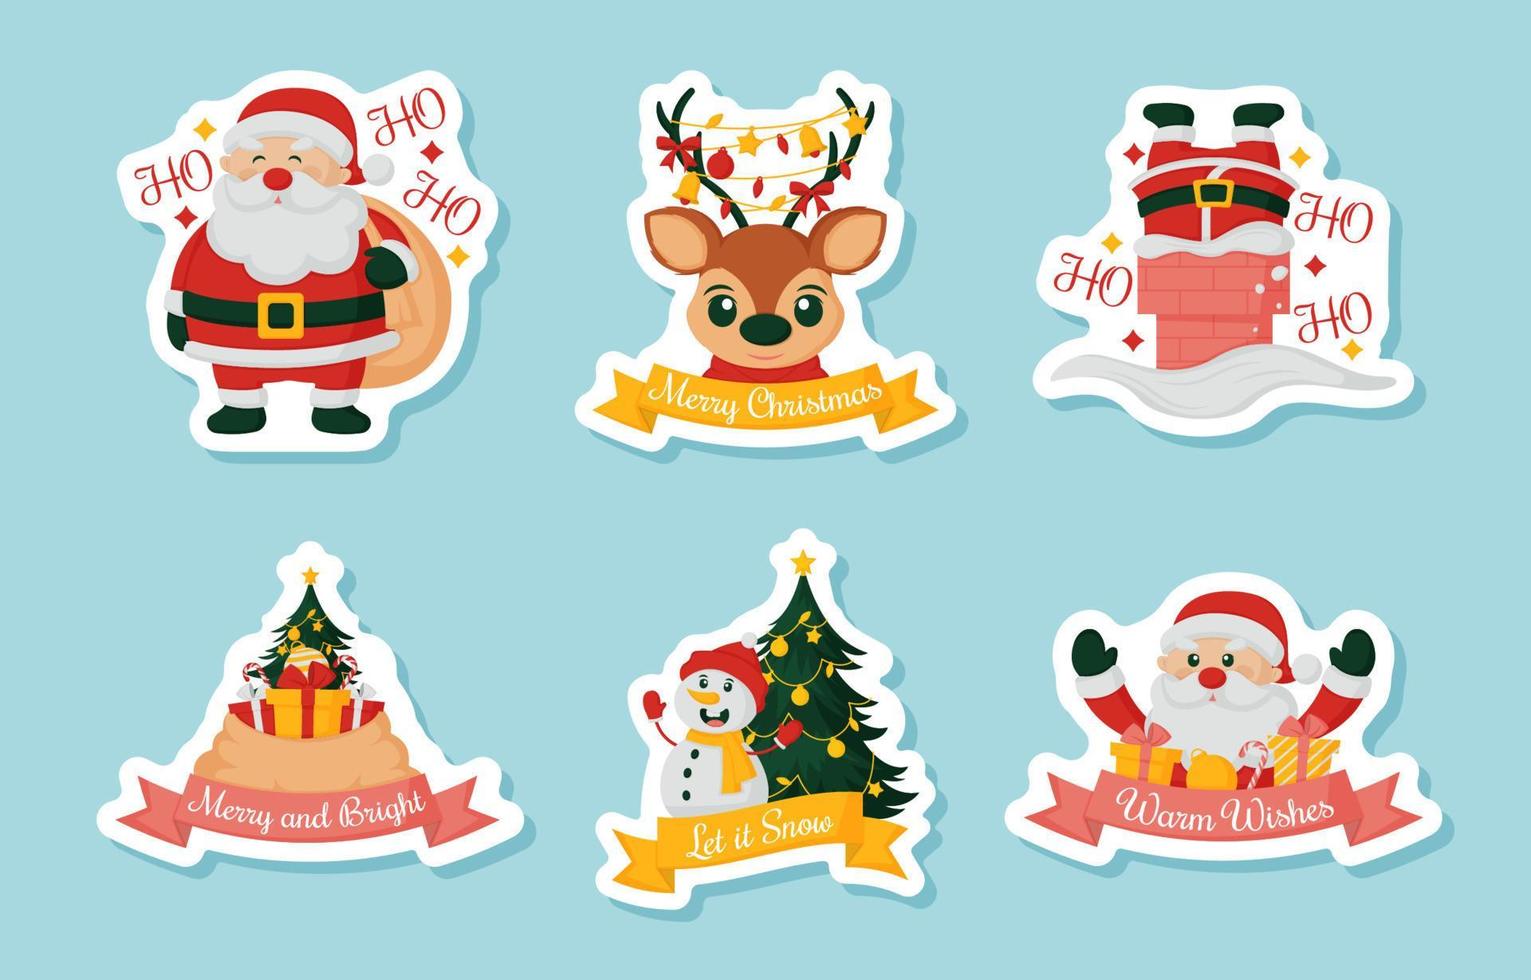 Christmas Santa Claus And The Helpers Greeting Stickers vector